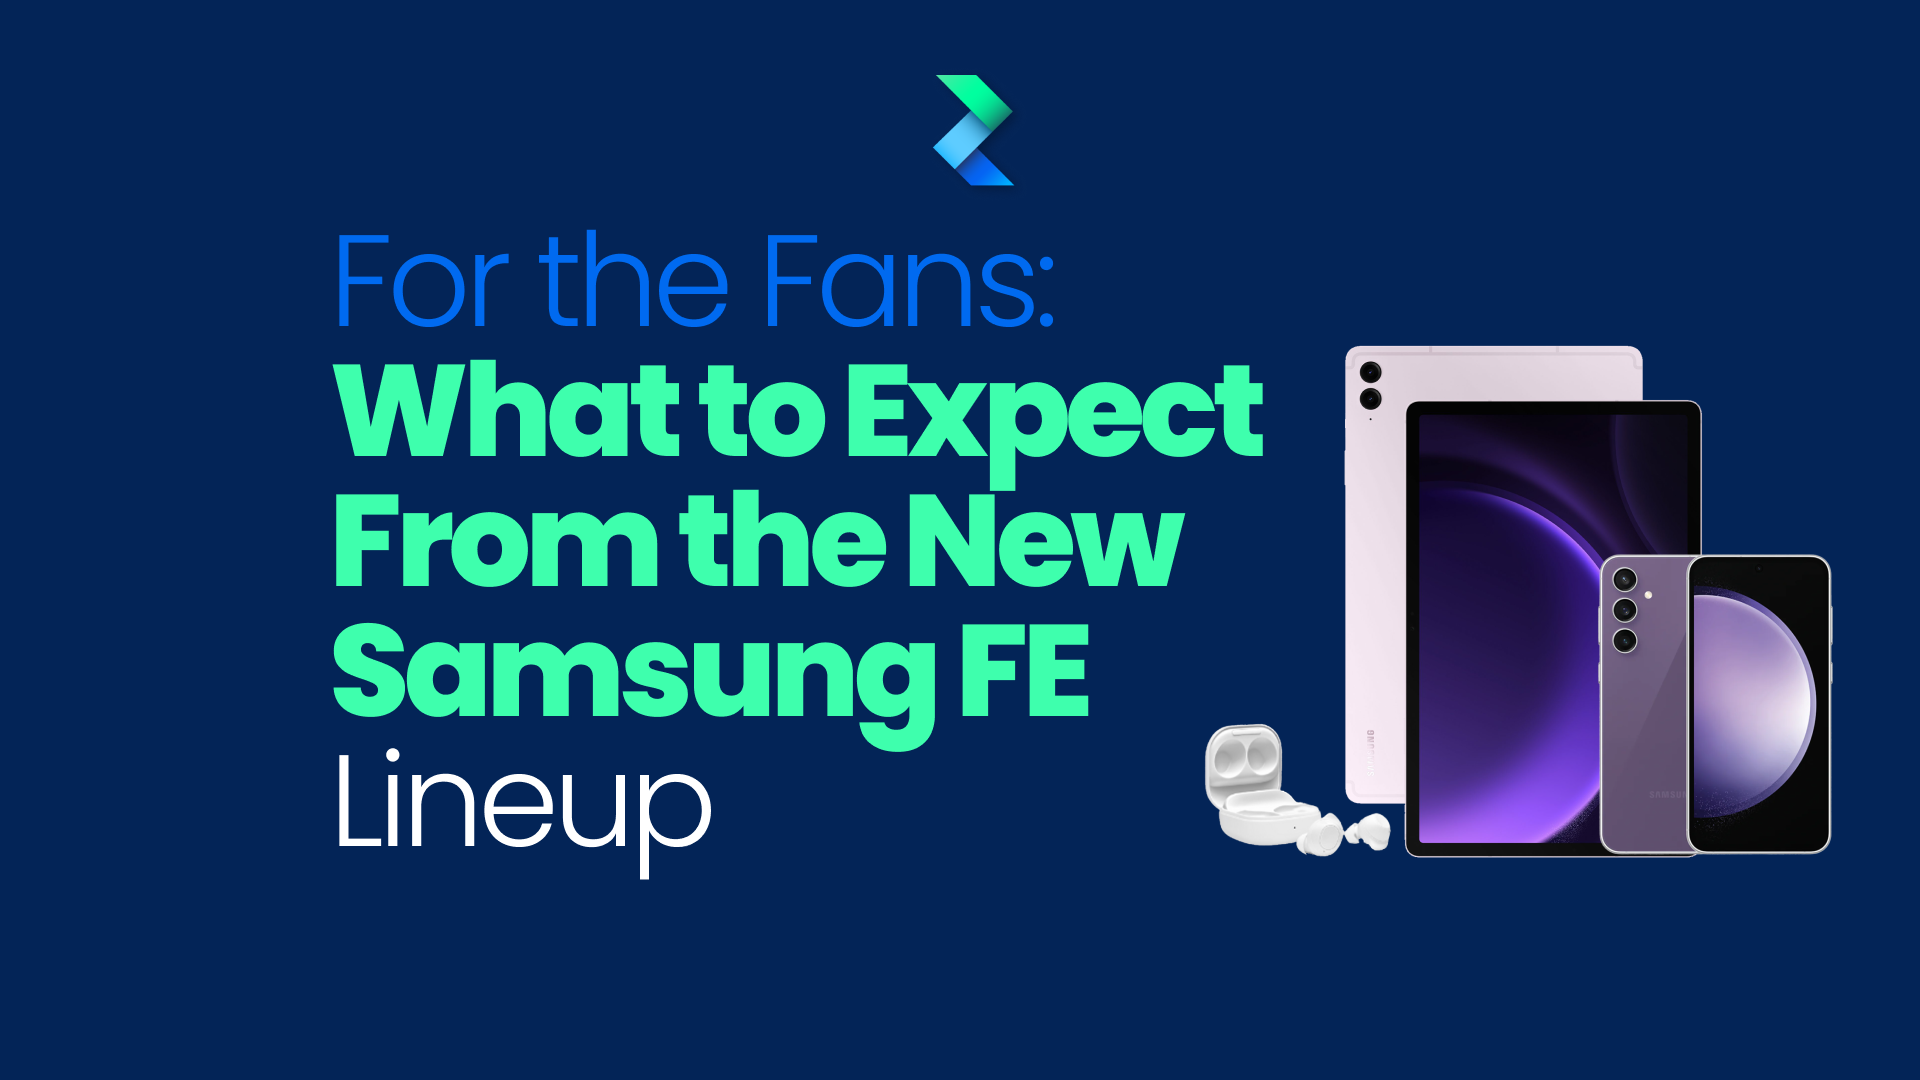 For the Fans: What to Expect From the New Samsung FE Lineup